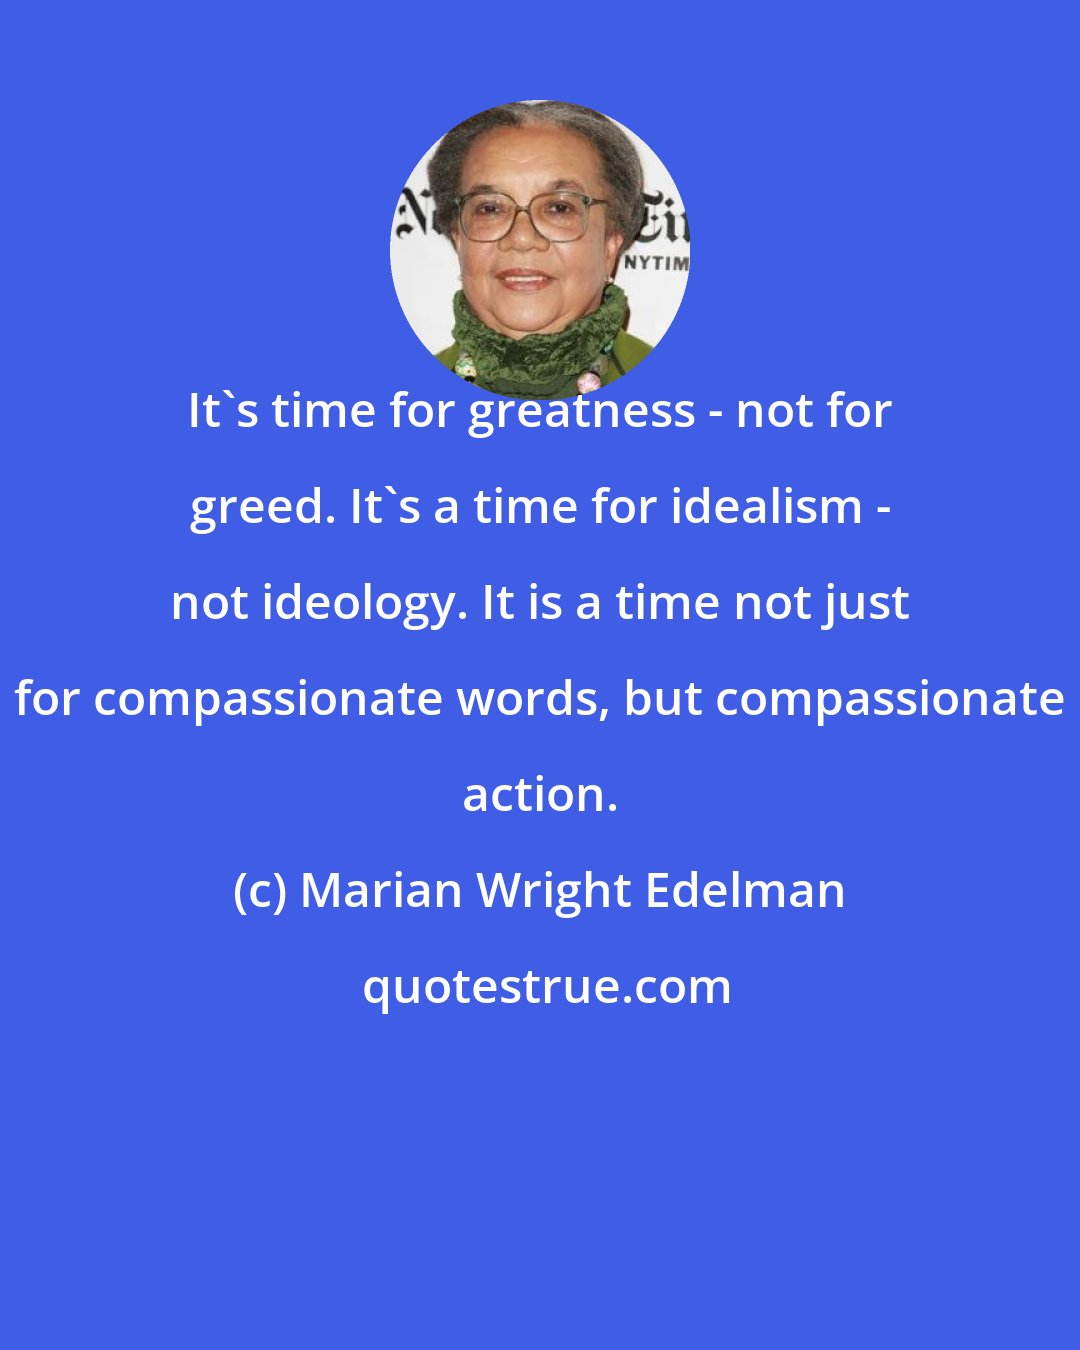 Marian Wright Edelman: It's time for greatness - not for greed. It's a time for idealism - not ideology. It is a time not just for compassionate words, but compassionate action.